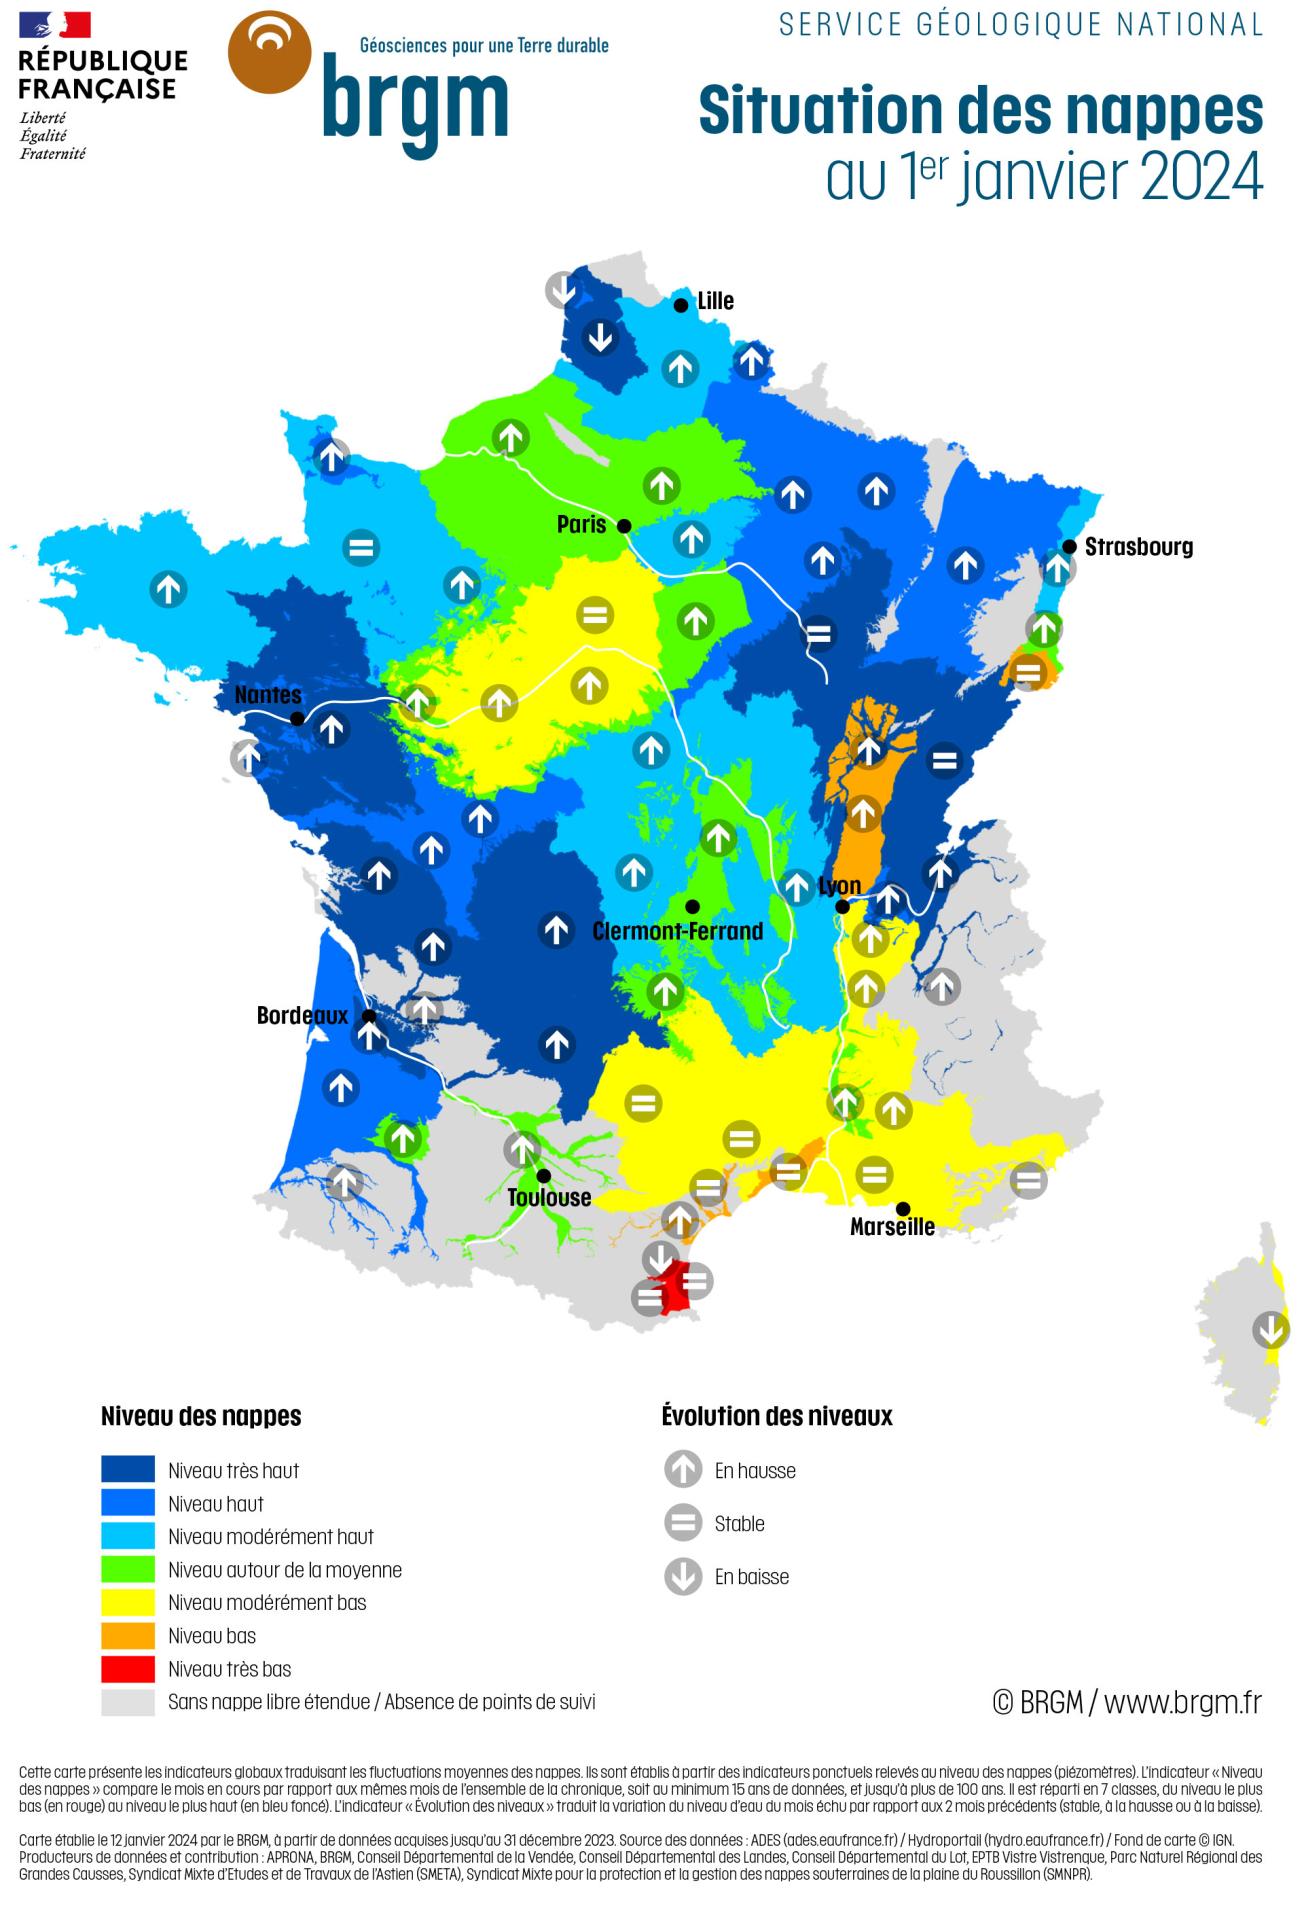 Map of aquifer levels in mainland France on 1 January 2024.